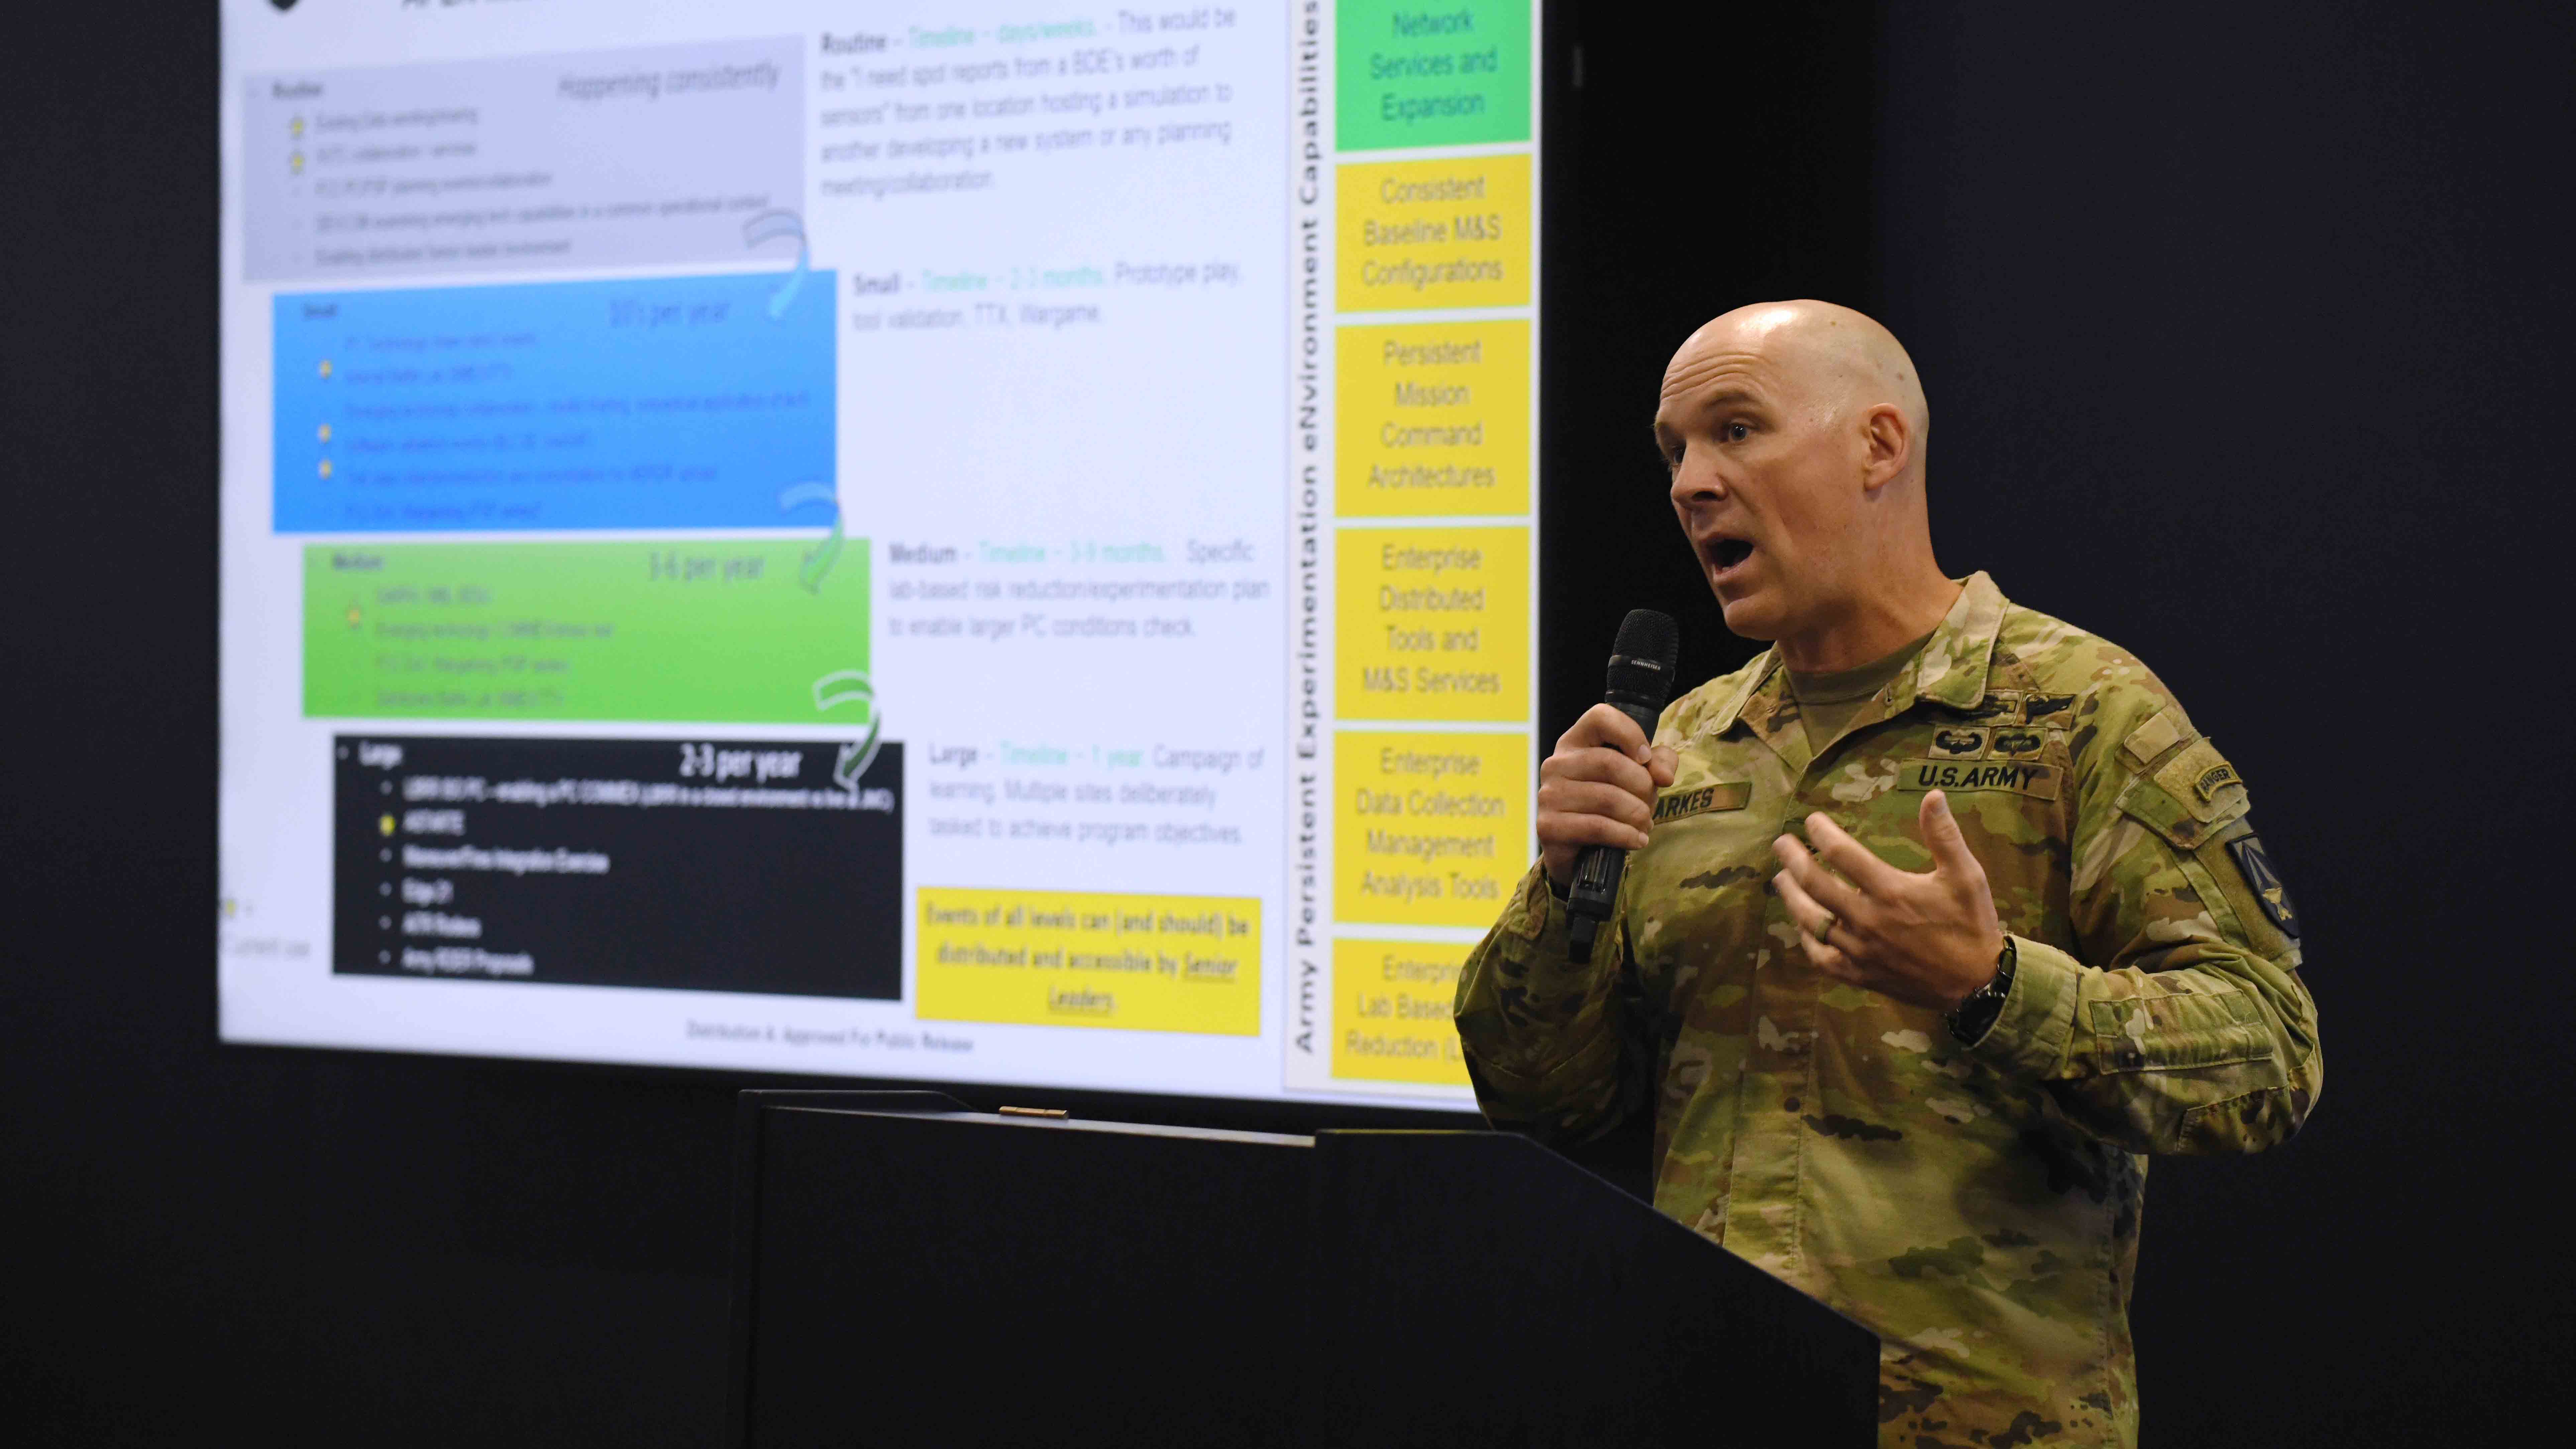 Col. David Parkes, Director of the U.S. Army's National Simulation Center, addresses attendees